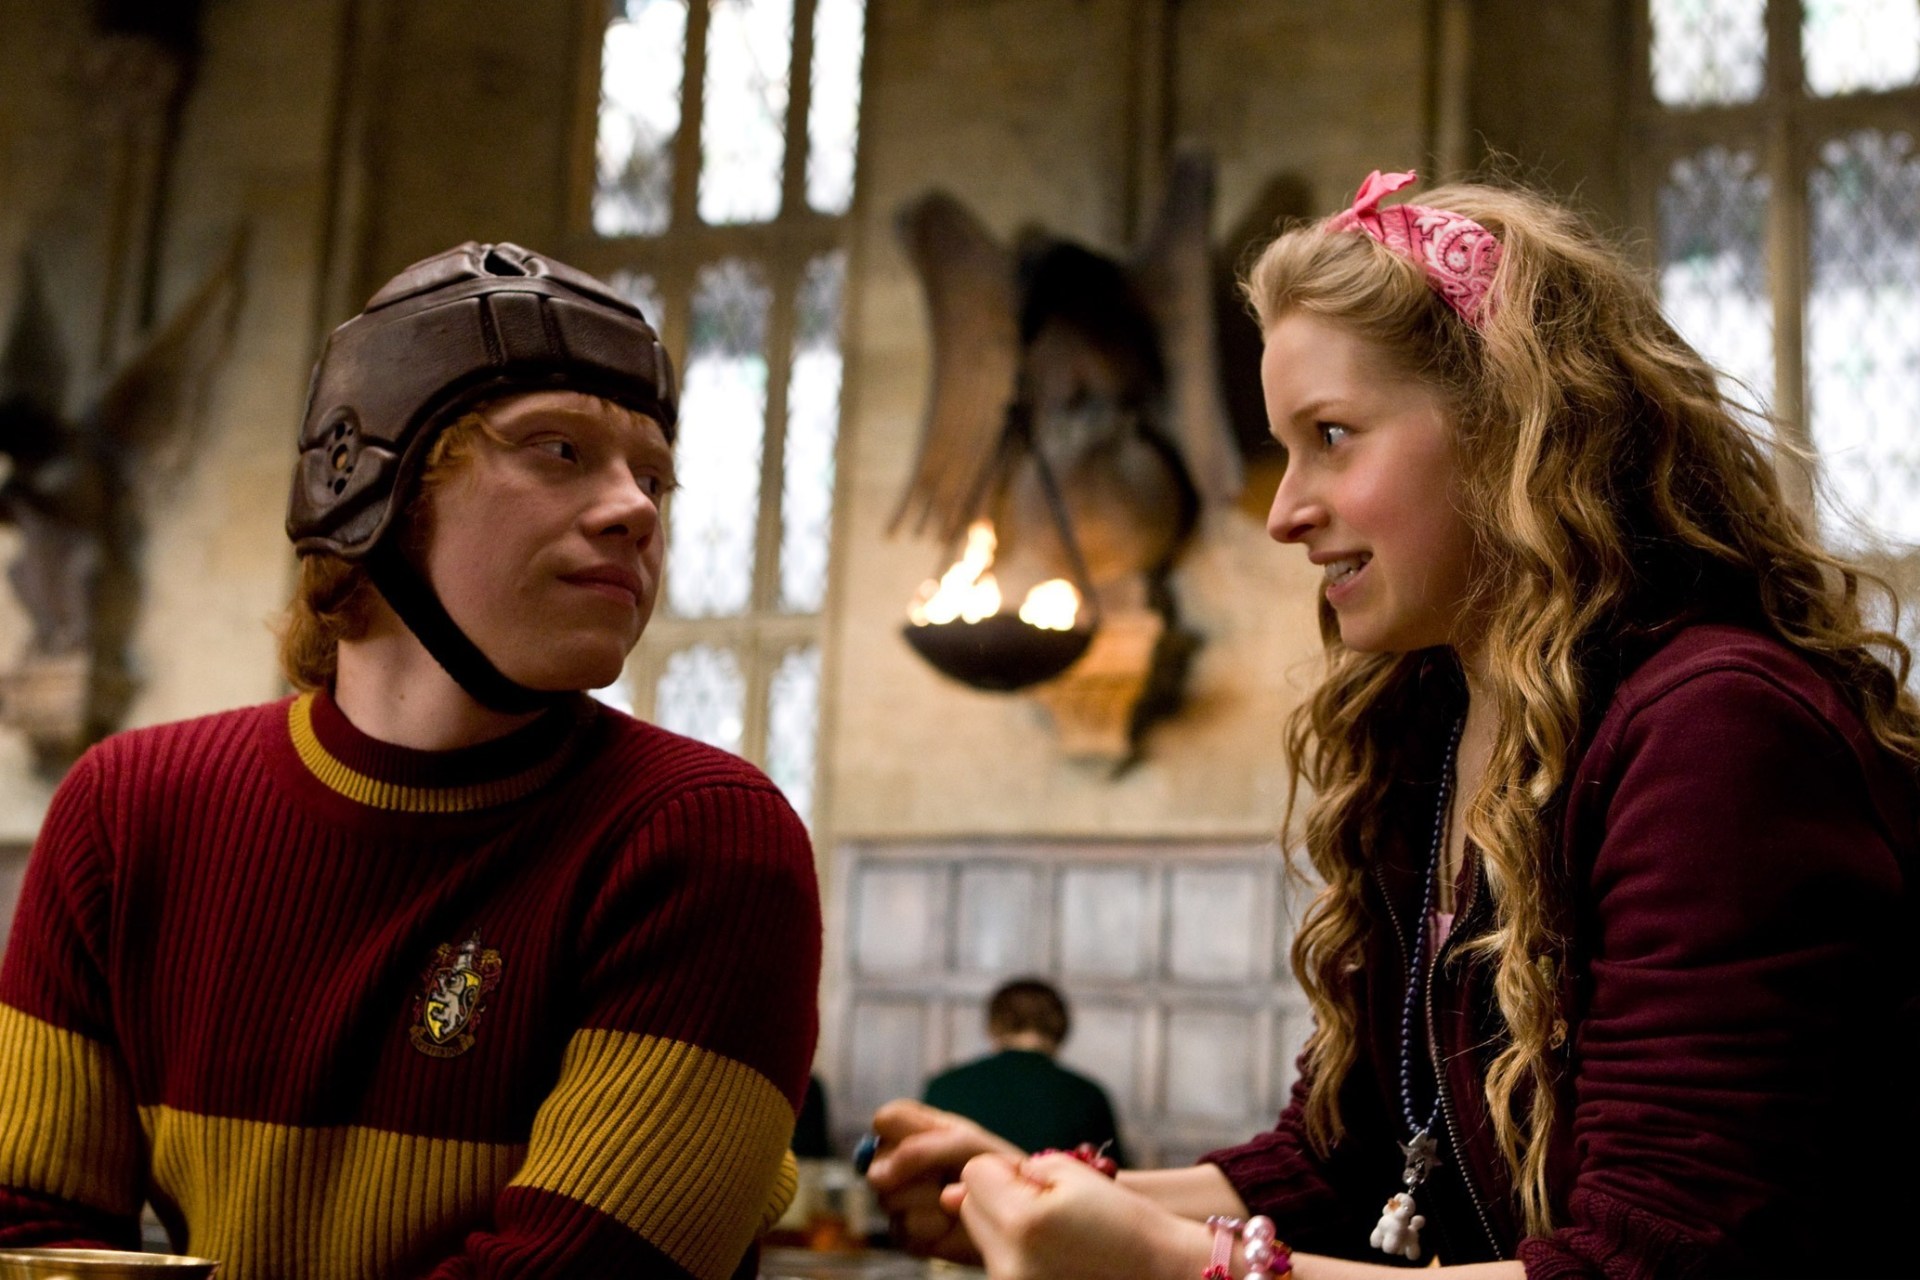 Here's Why You're Not In A Relationship Based On Your Hogwarts House